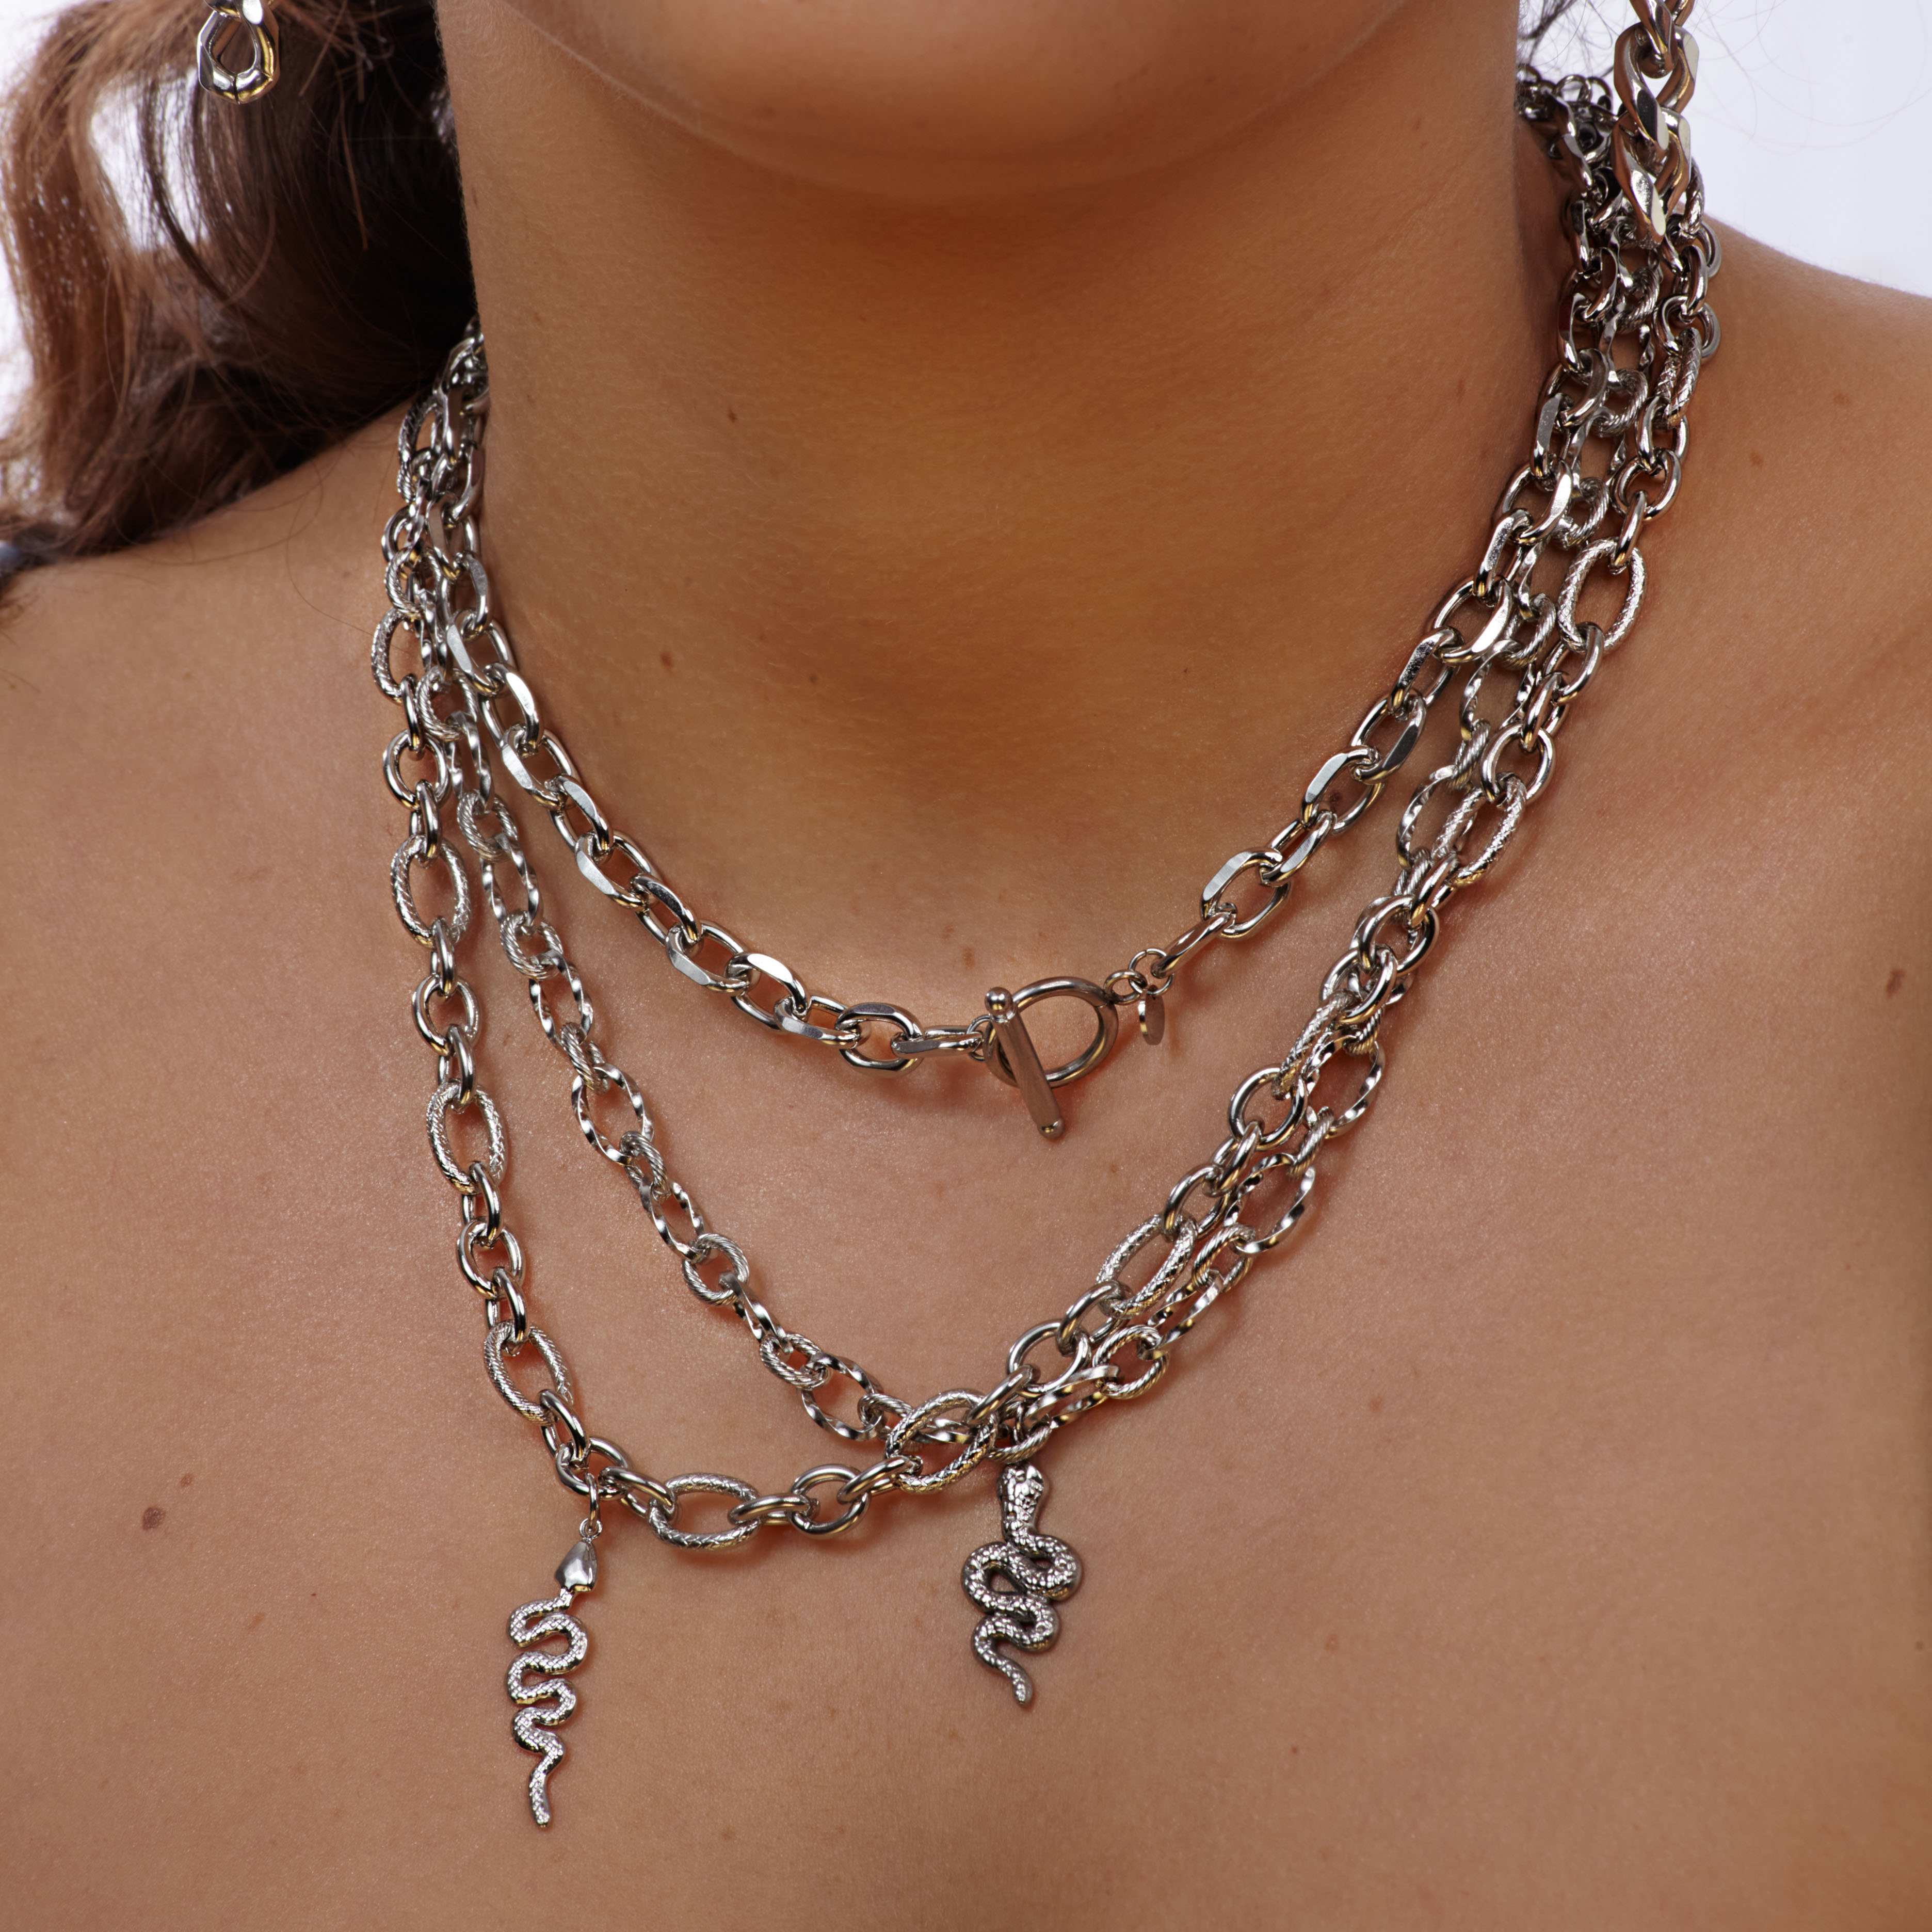 Snake Chain Stainless Steel Necklace